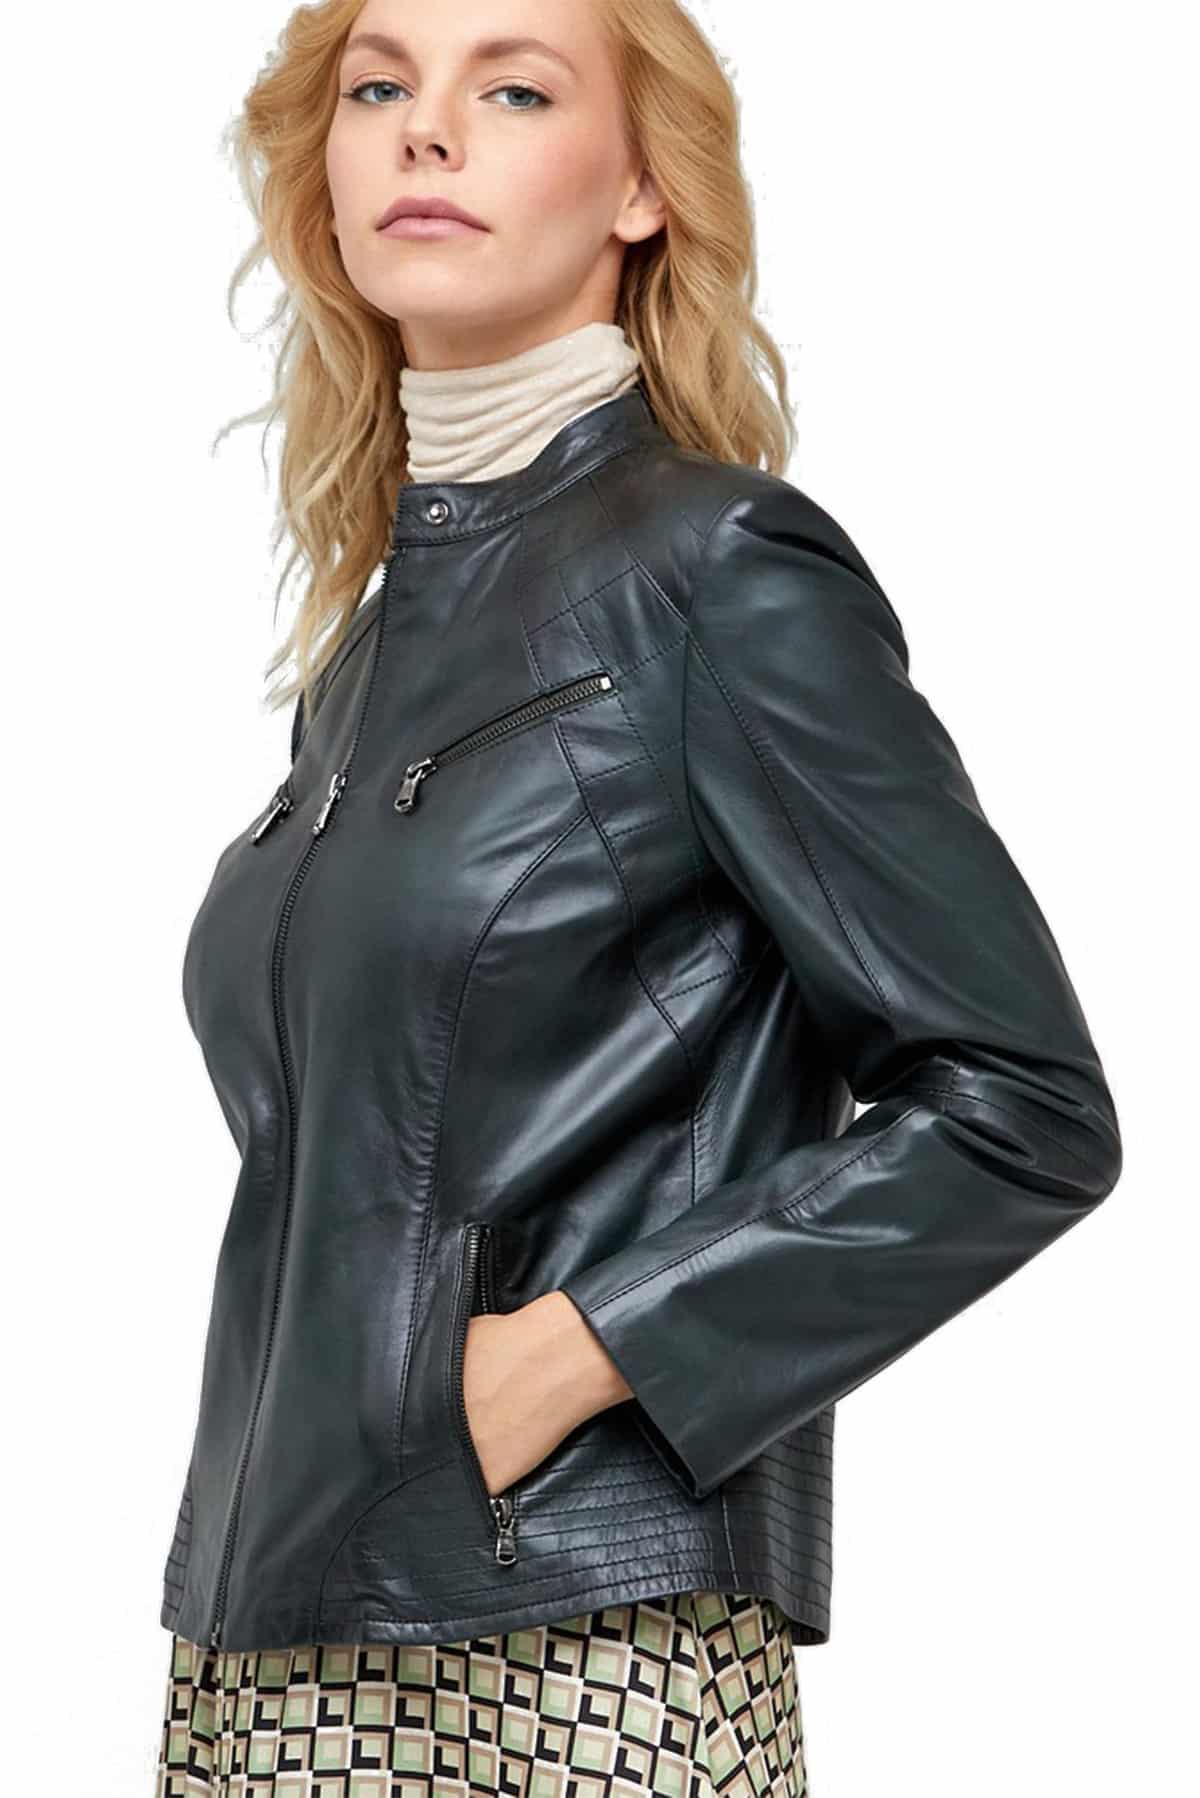 black or brown leather jacket women's